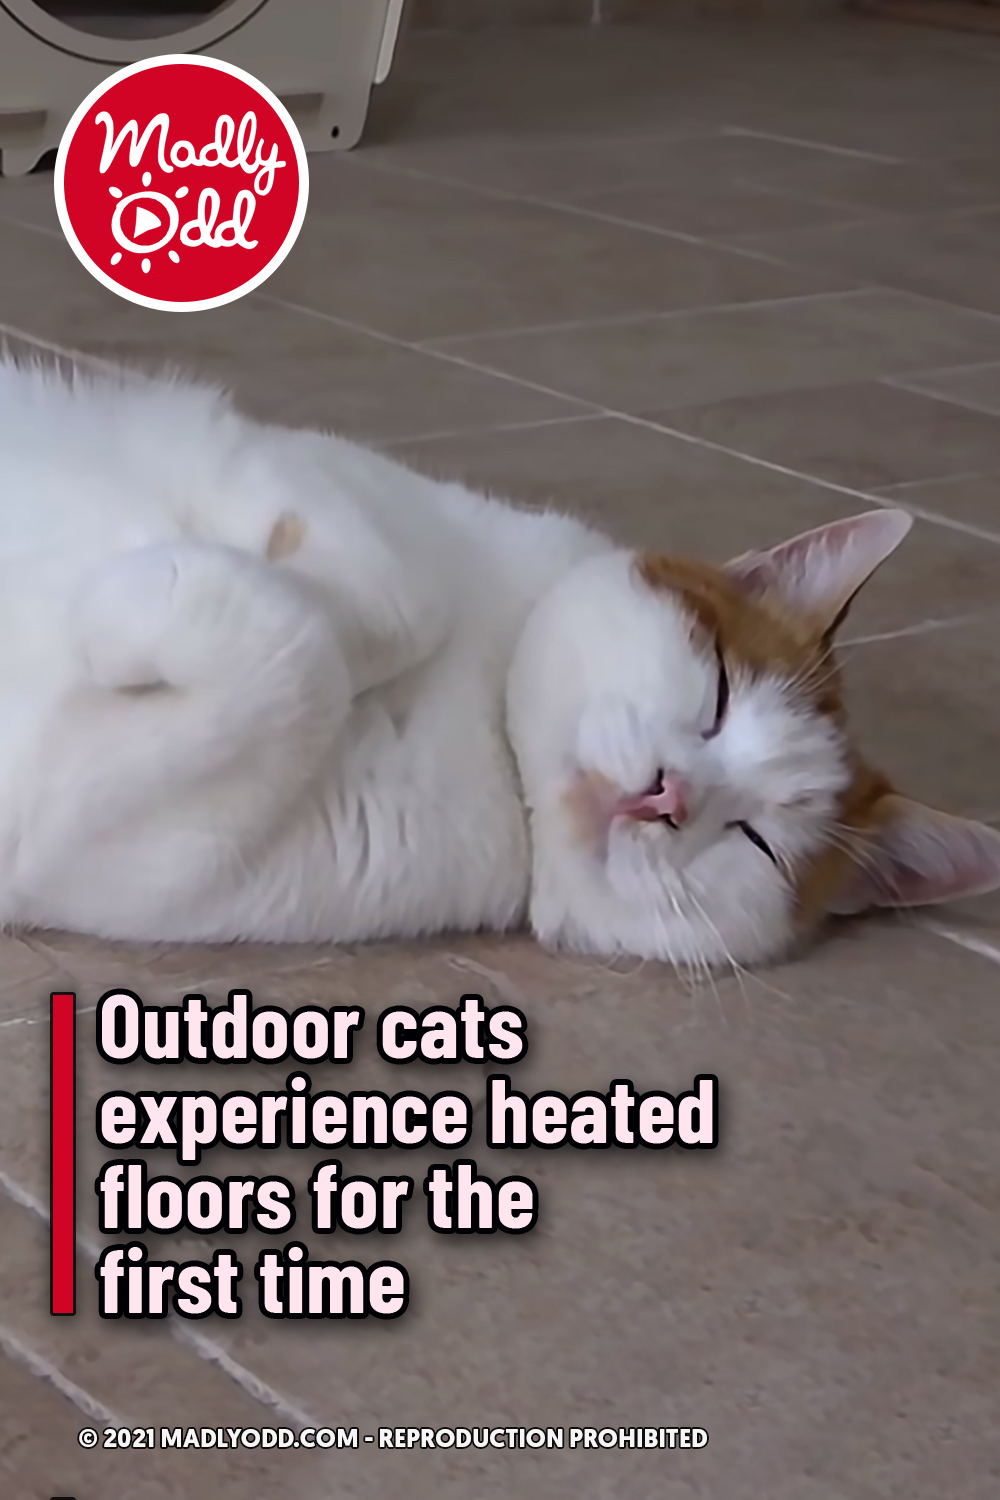 Outdoor cats experience heated floors for the first time